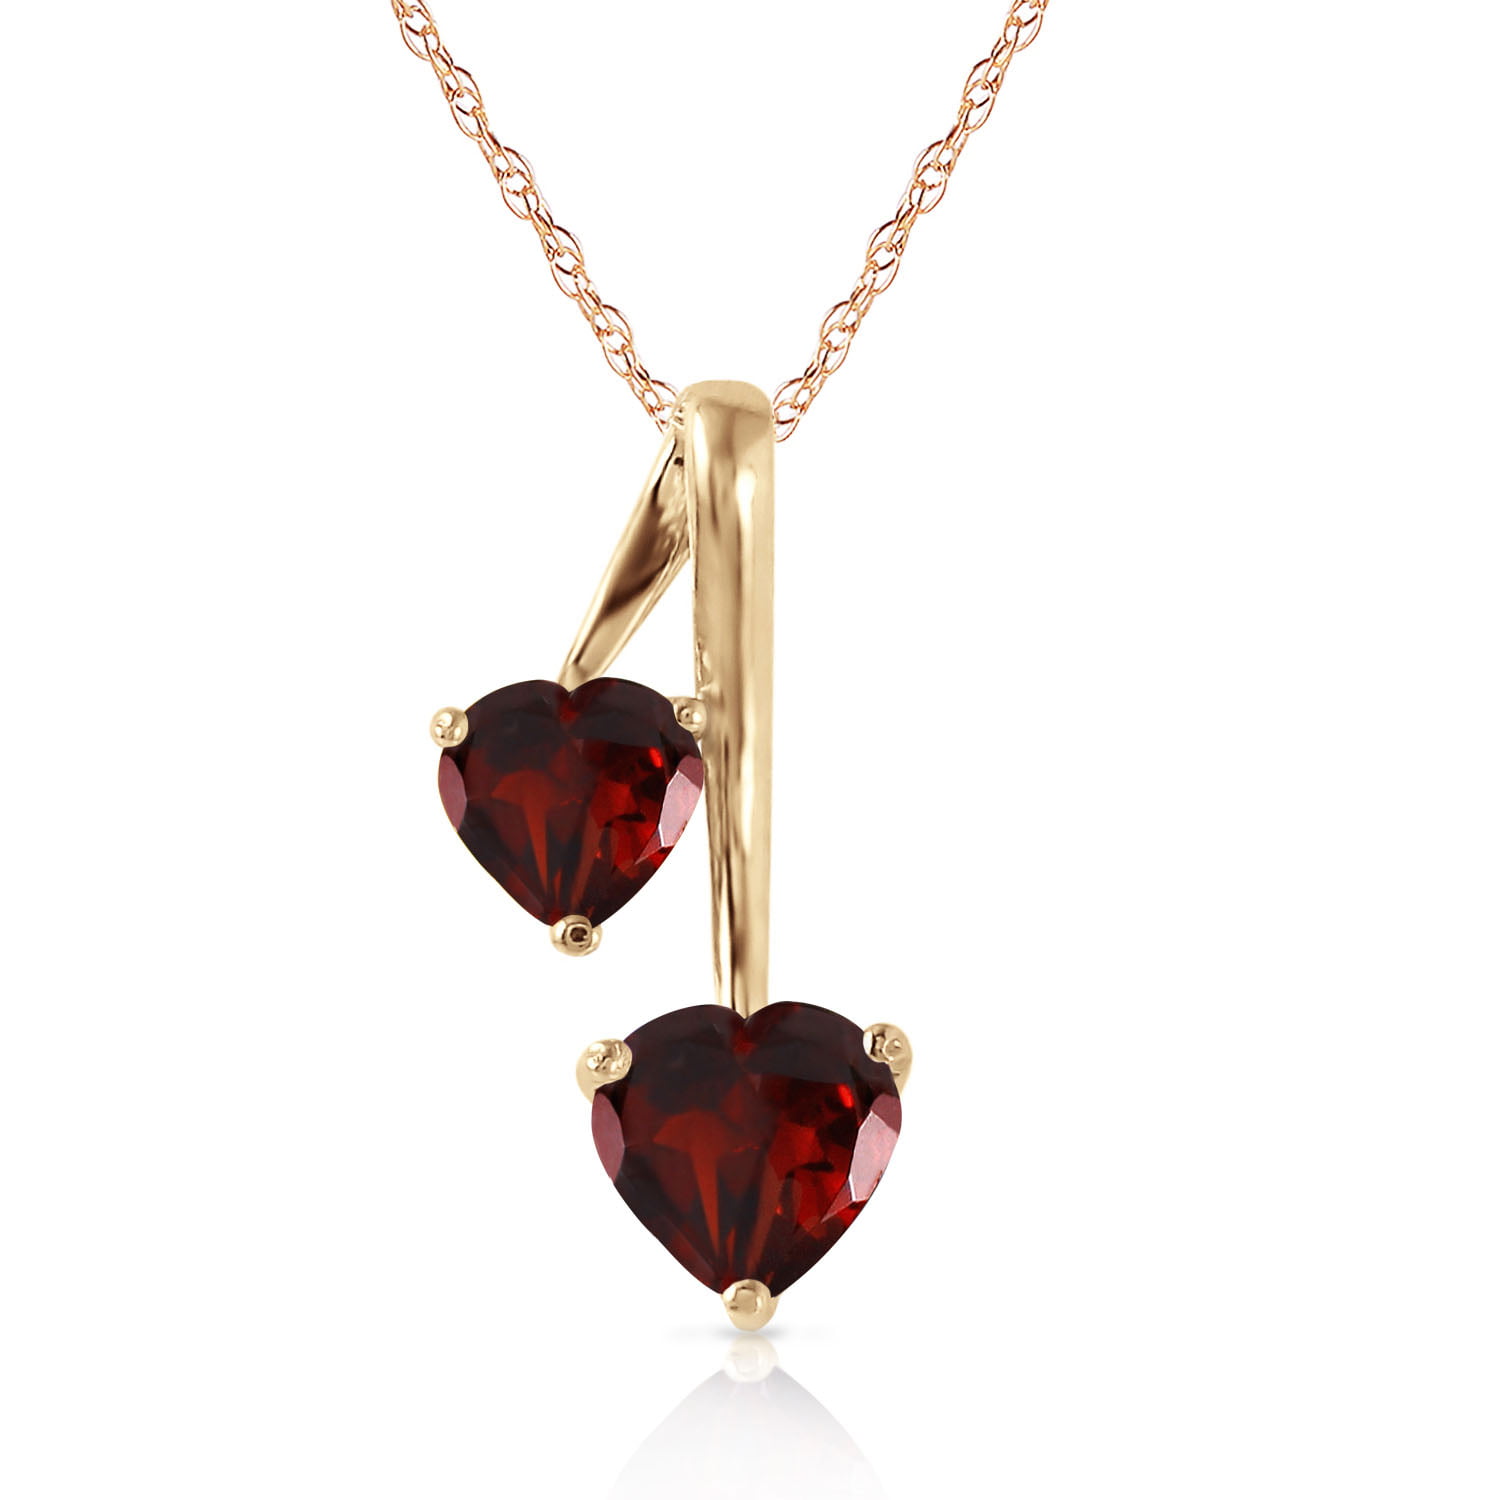 Galaxy Gold 14K Solid White Rose Yellow Gold Pendant Necklace with Natural  Genuine Heart Garnet - Double Heart - High Polished Brilliant Cut - Grade 